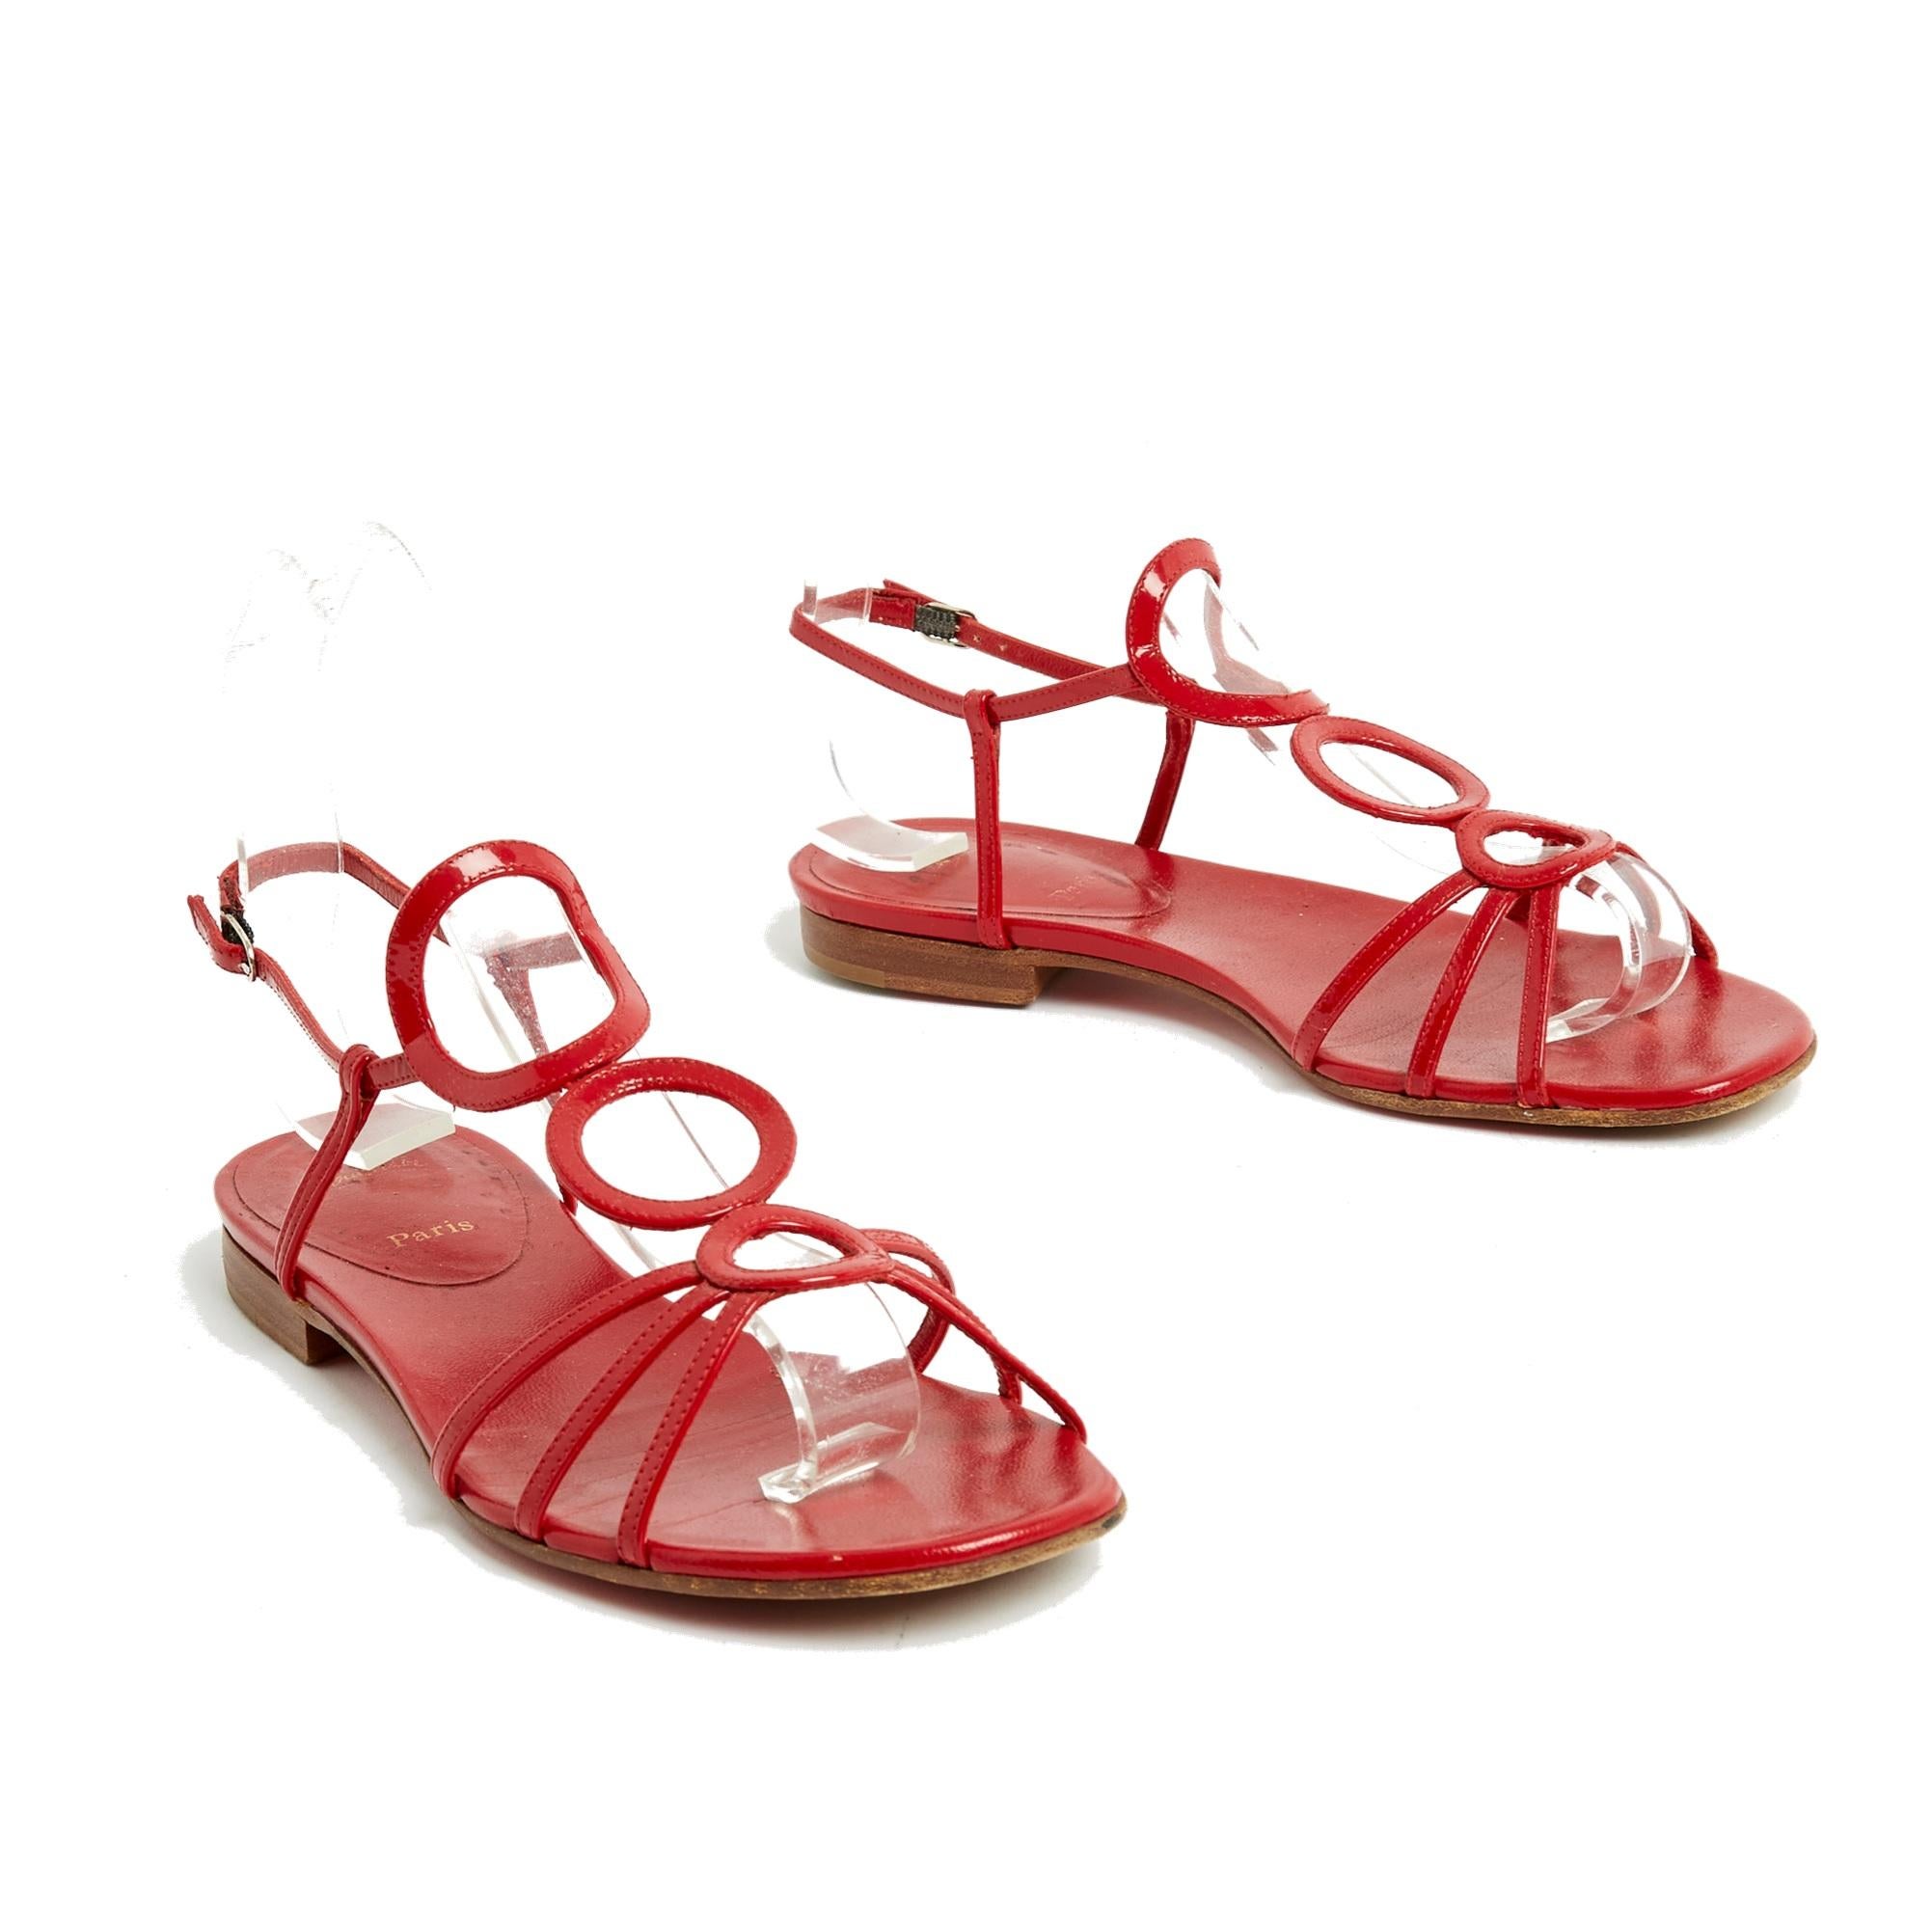 Flat Christian Louboutin Aplarona model sandals in red patent leather with thin straps in a circle pattern on the top of the foot. Size EU37.5 or UK 4.5 and US7. The sandals have been worn but only the sole is marked and they are perfect for summer.